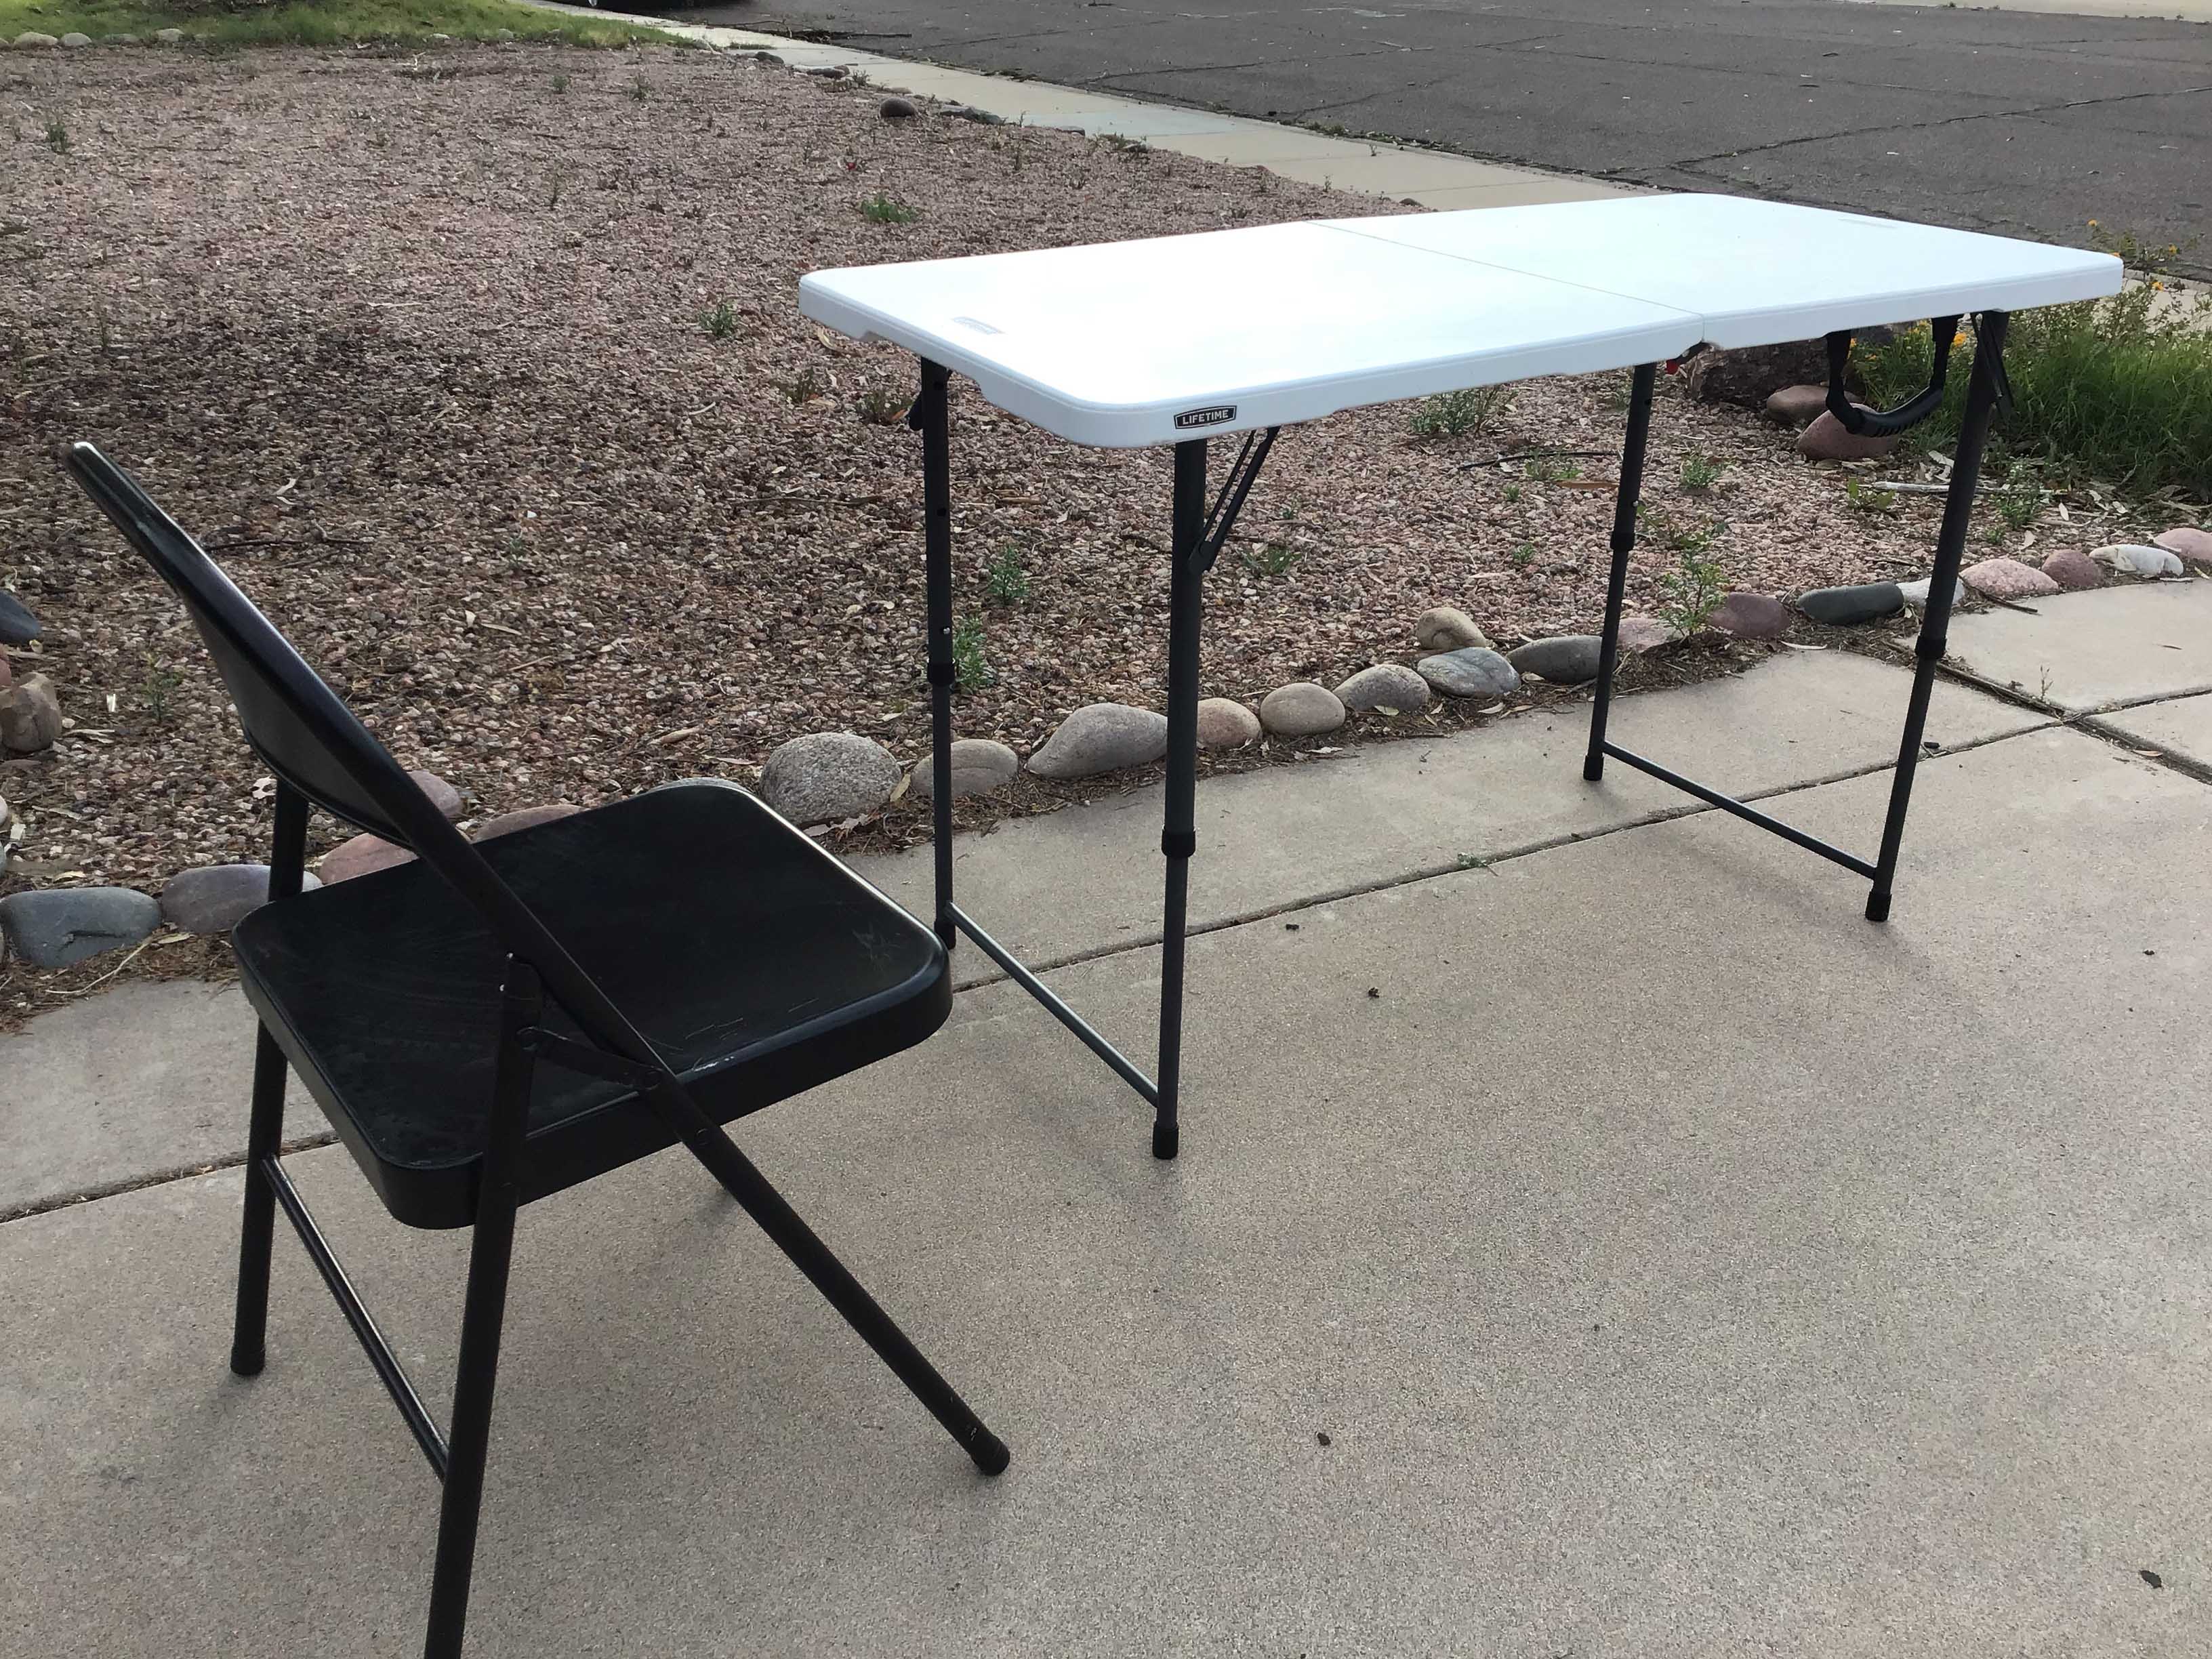 4 foot rectangle tables (adjustable height; white)